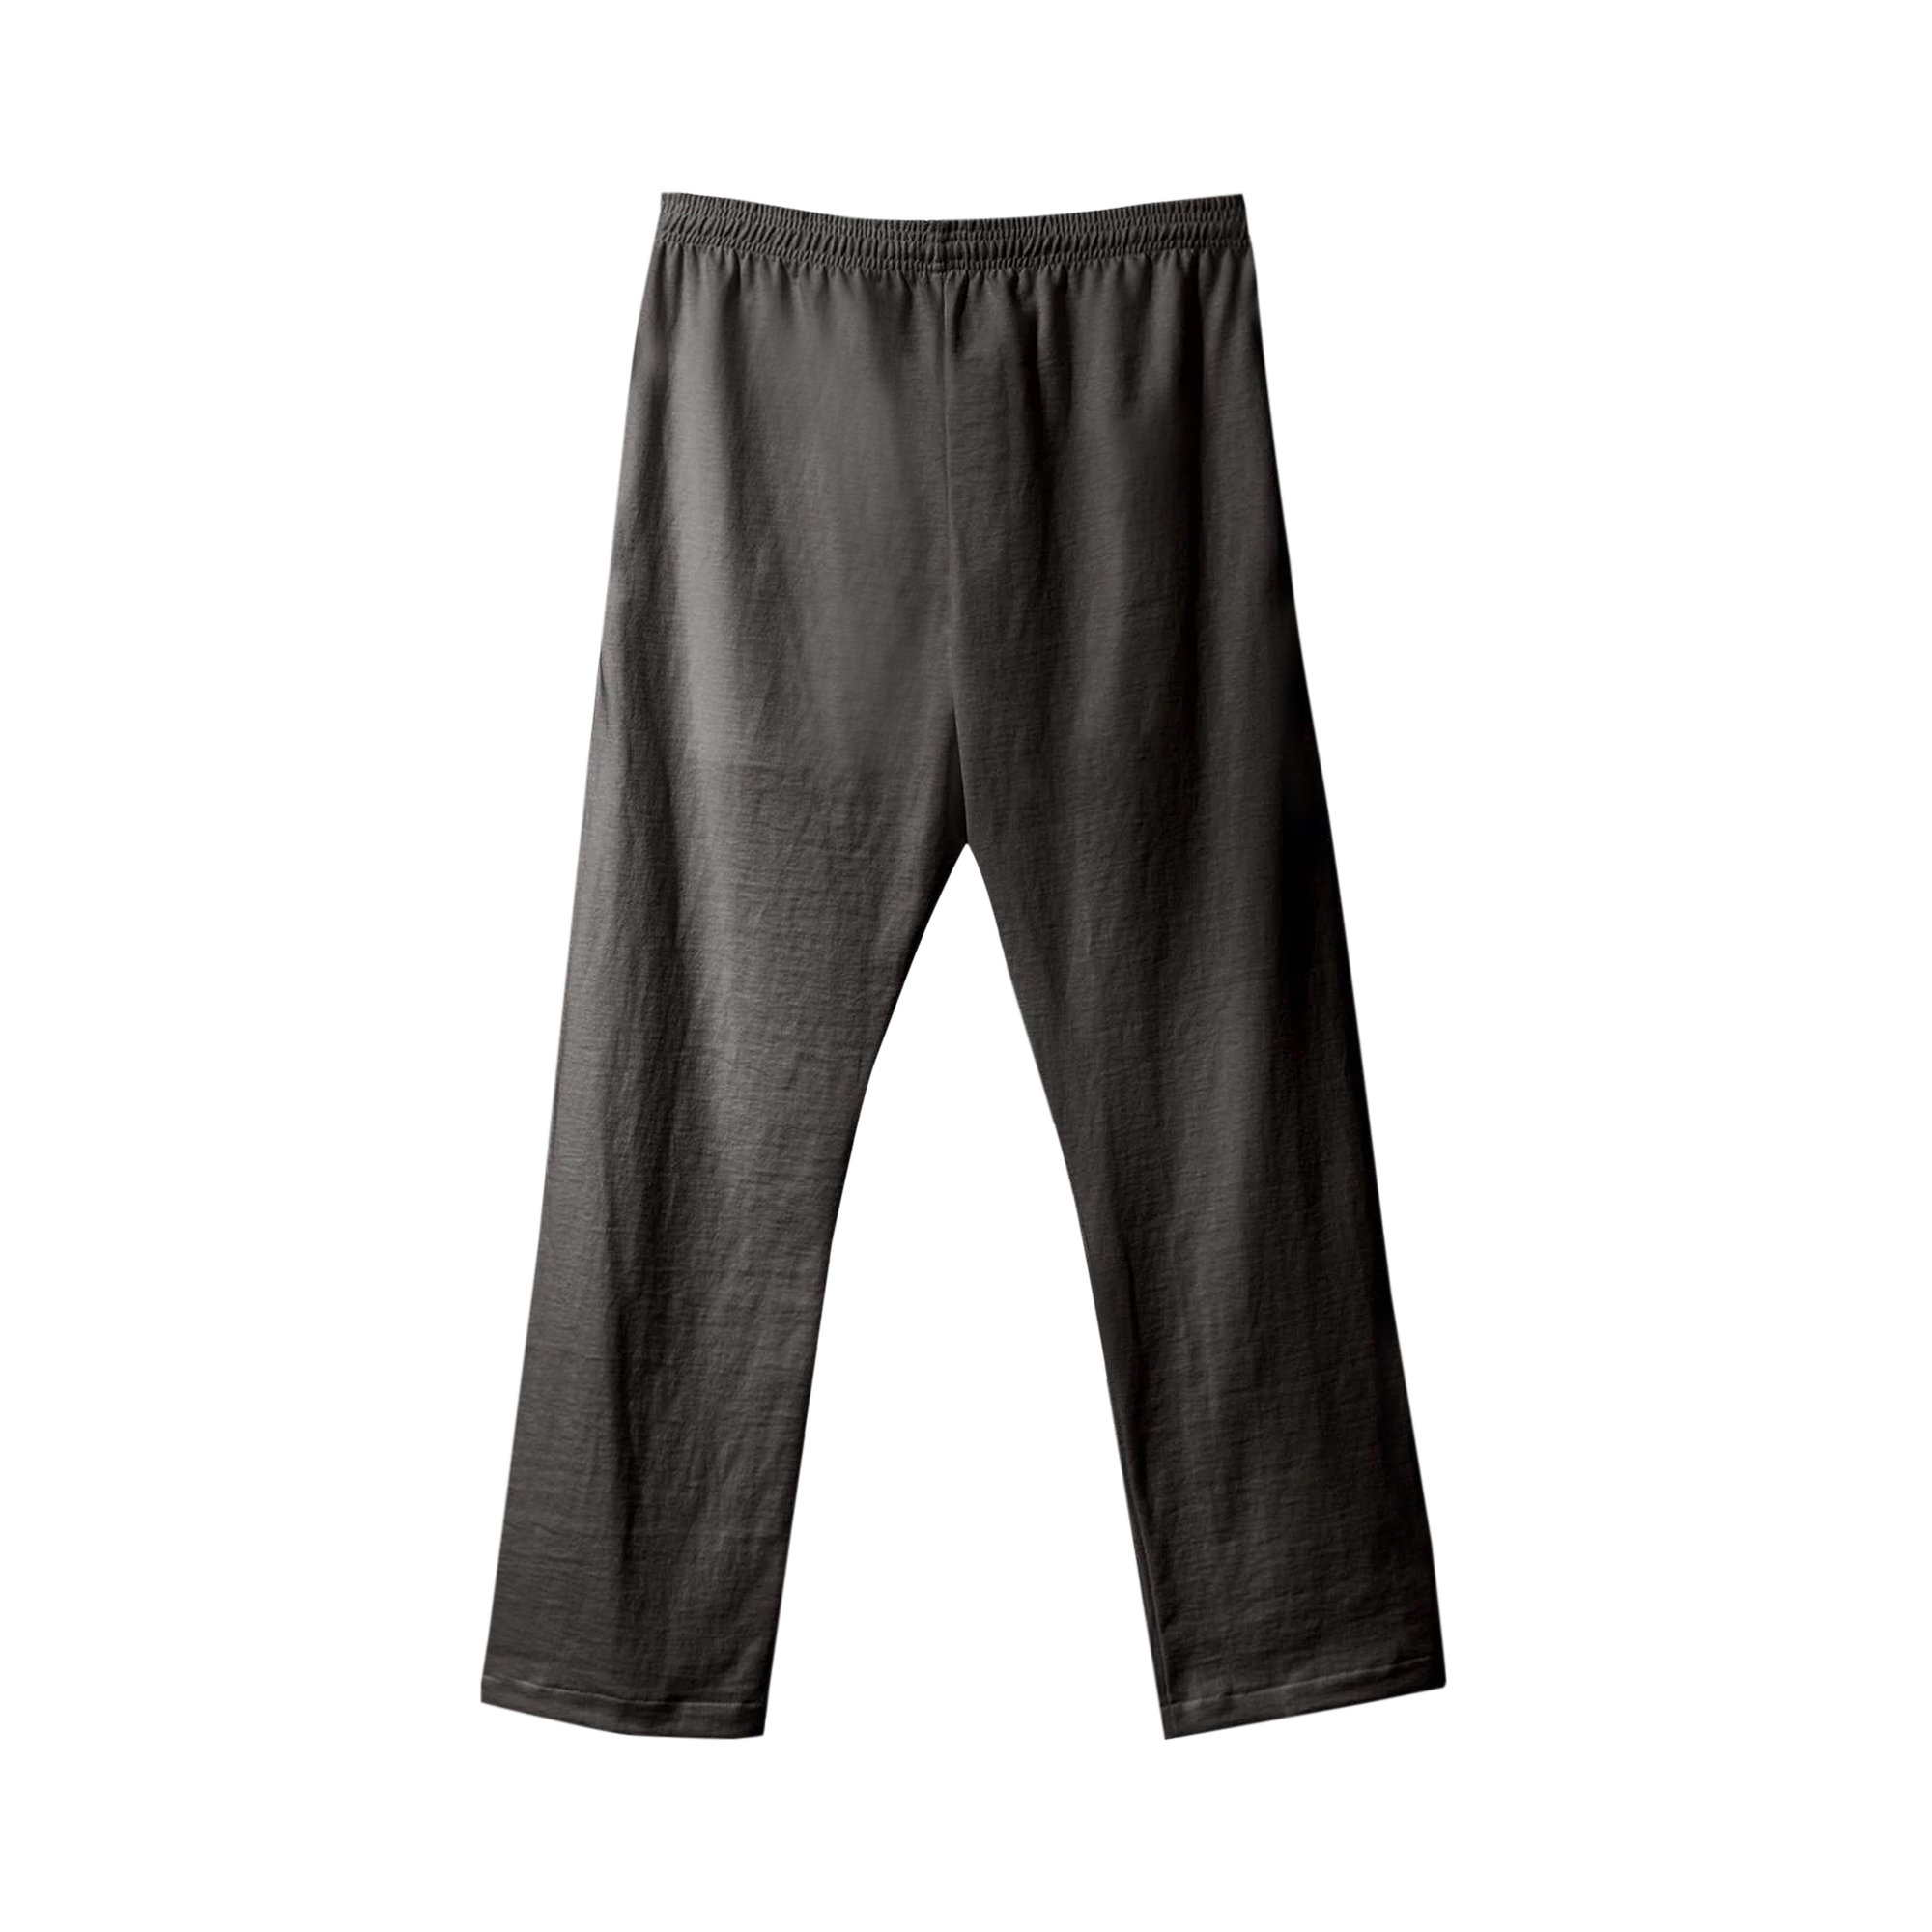 Buy Yeezy Gap Engineered By Balenciaga Fitted Sweatpants